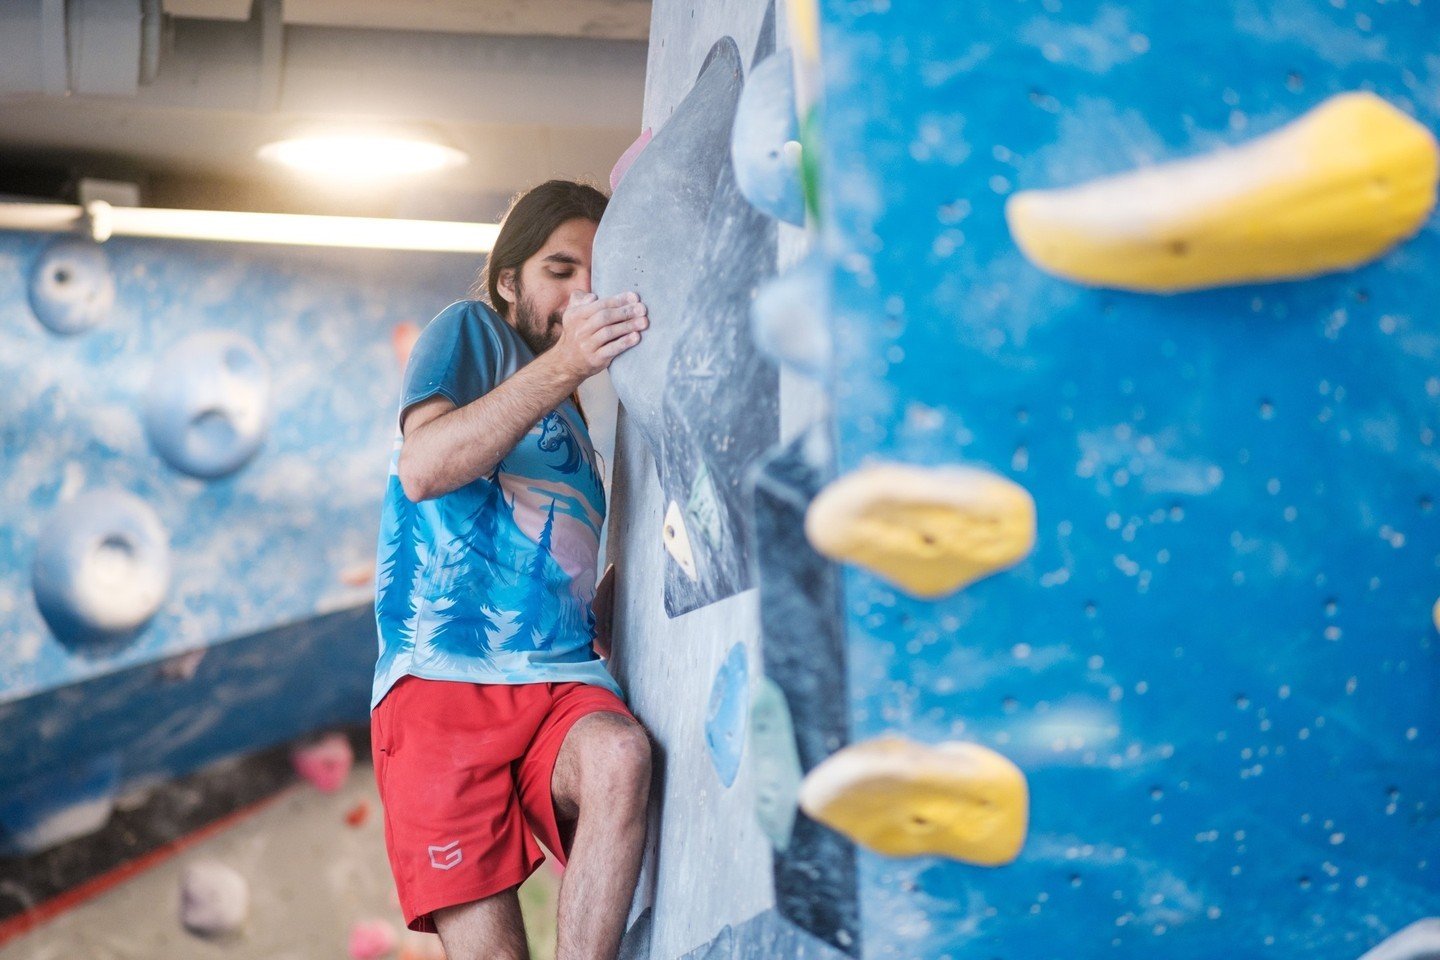 The Boulders Climate and Culture Survey is open until 5/21!⁠
⁠
If you have a moment, please fill it out. Your feedback is incredibly important to us, and helps make Boulders a better gym for everyone. Responses are totally anonymous and the survey ta